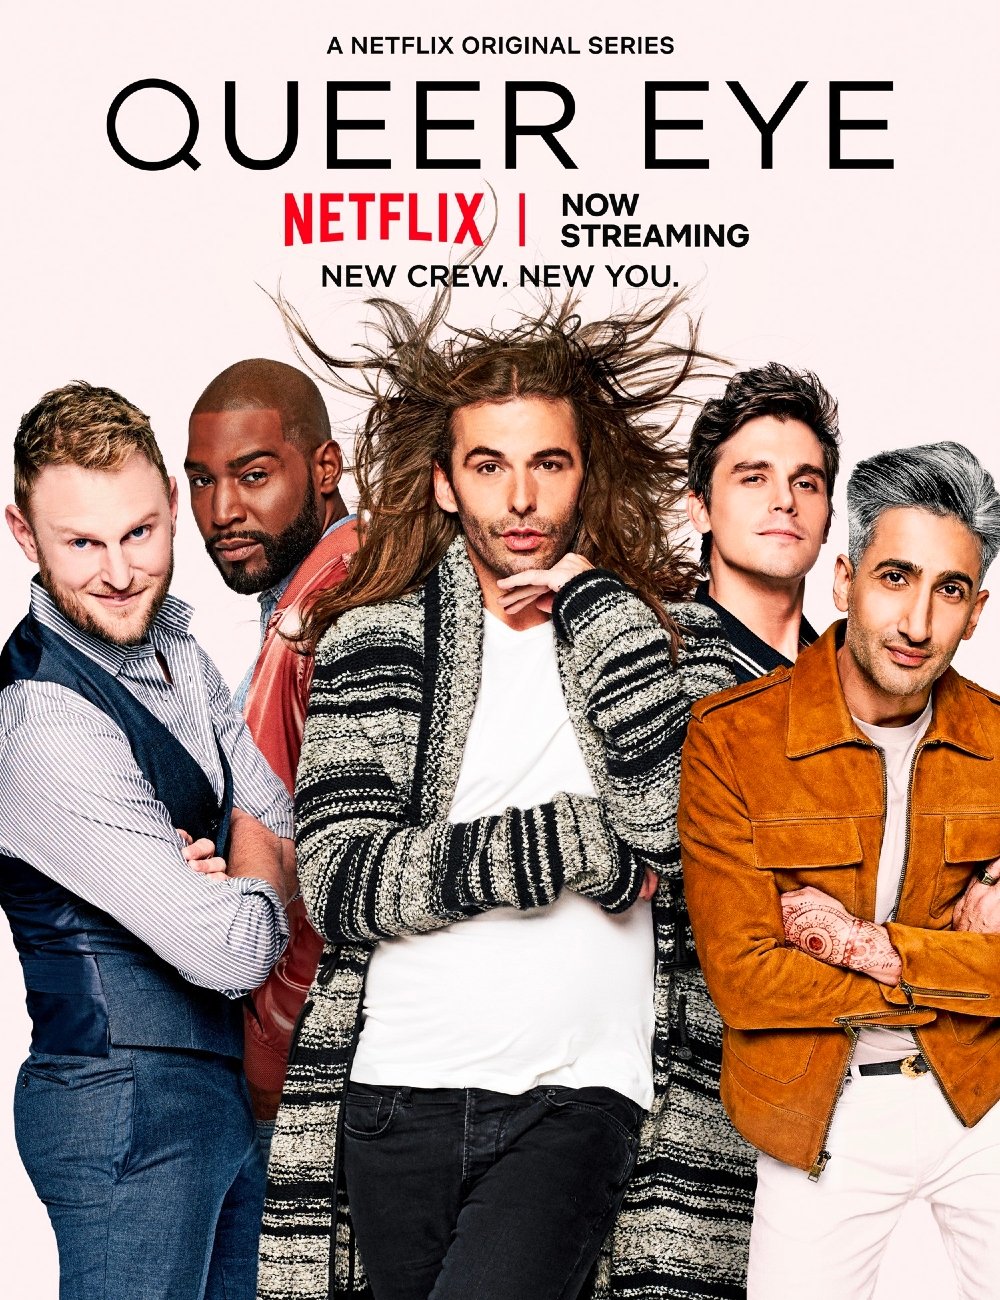 Queer Eye - assistir - reality shows - Netflix - melhores reality shows - https://stealthelook.com.br